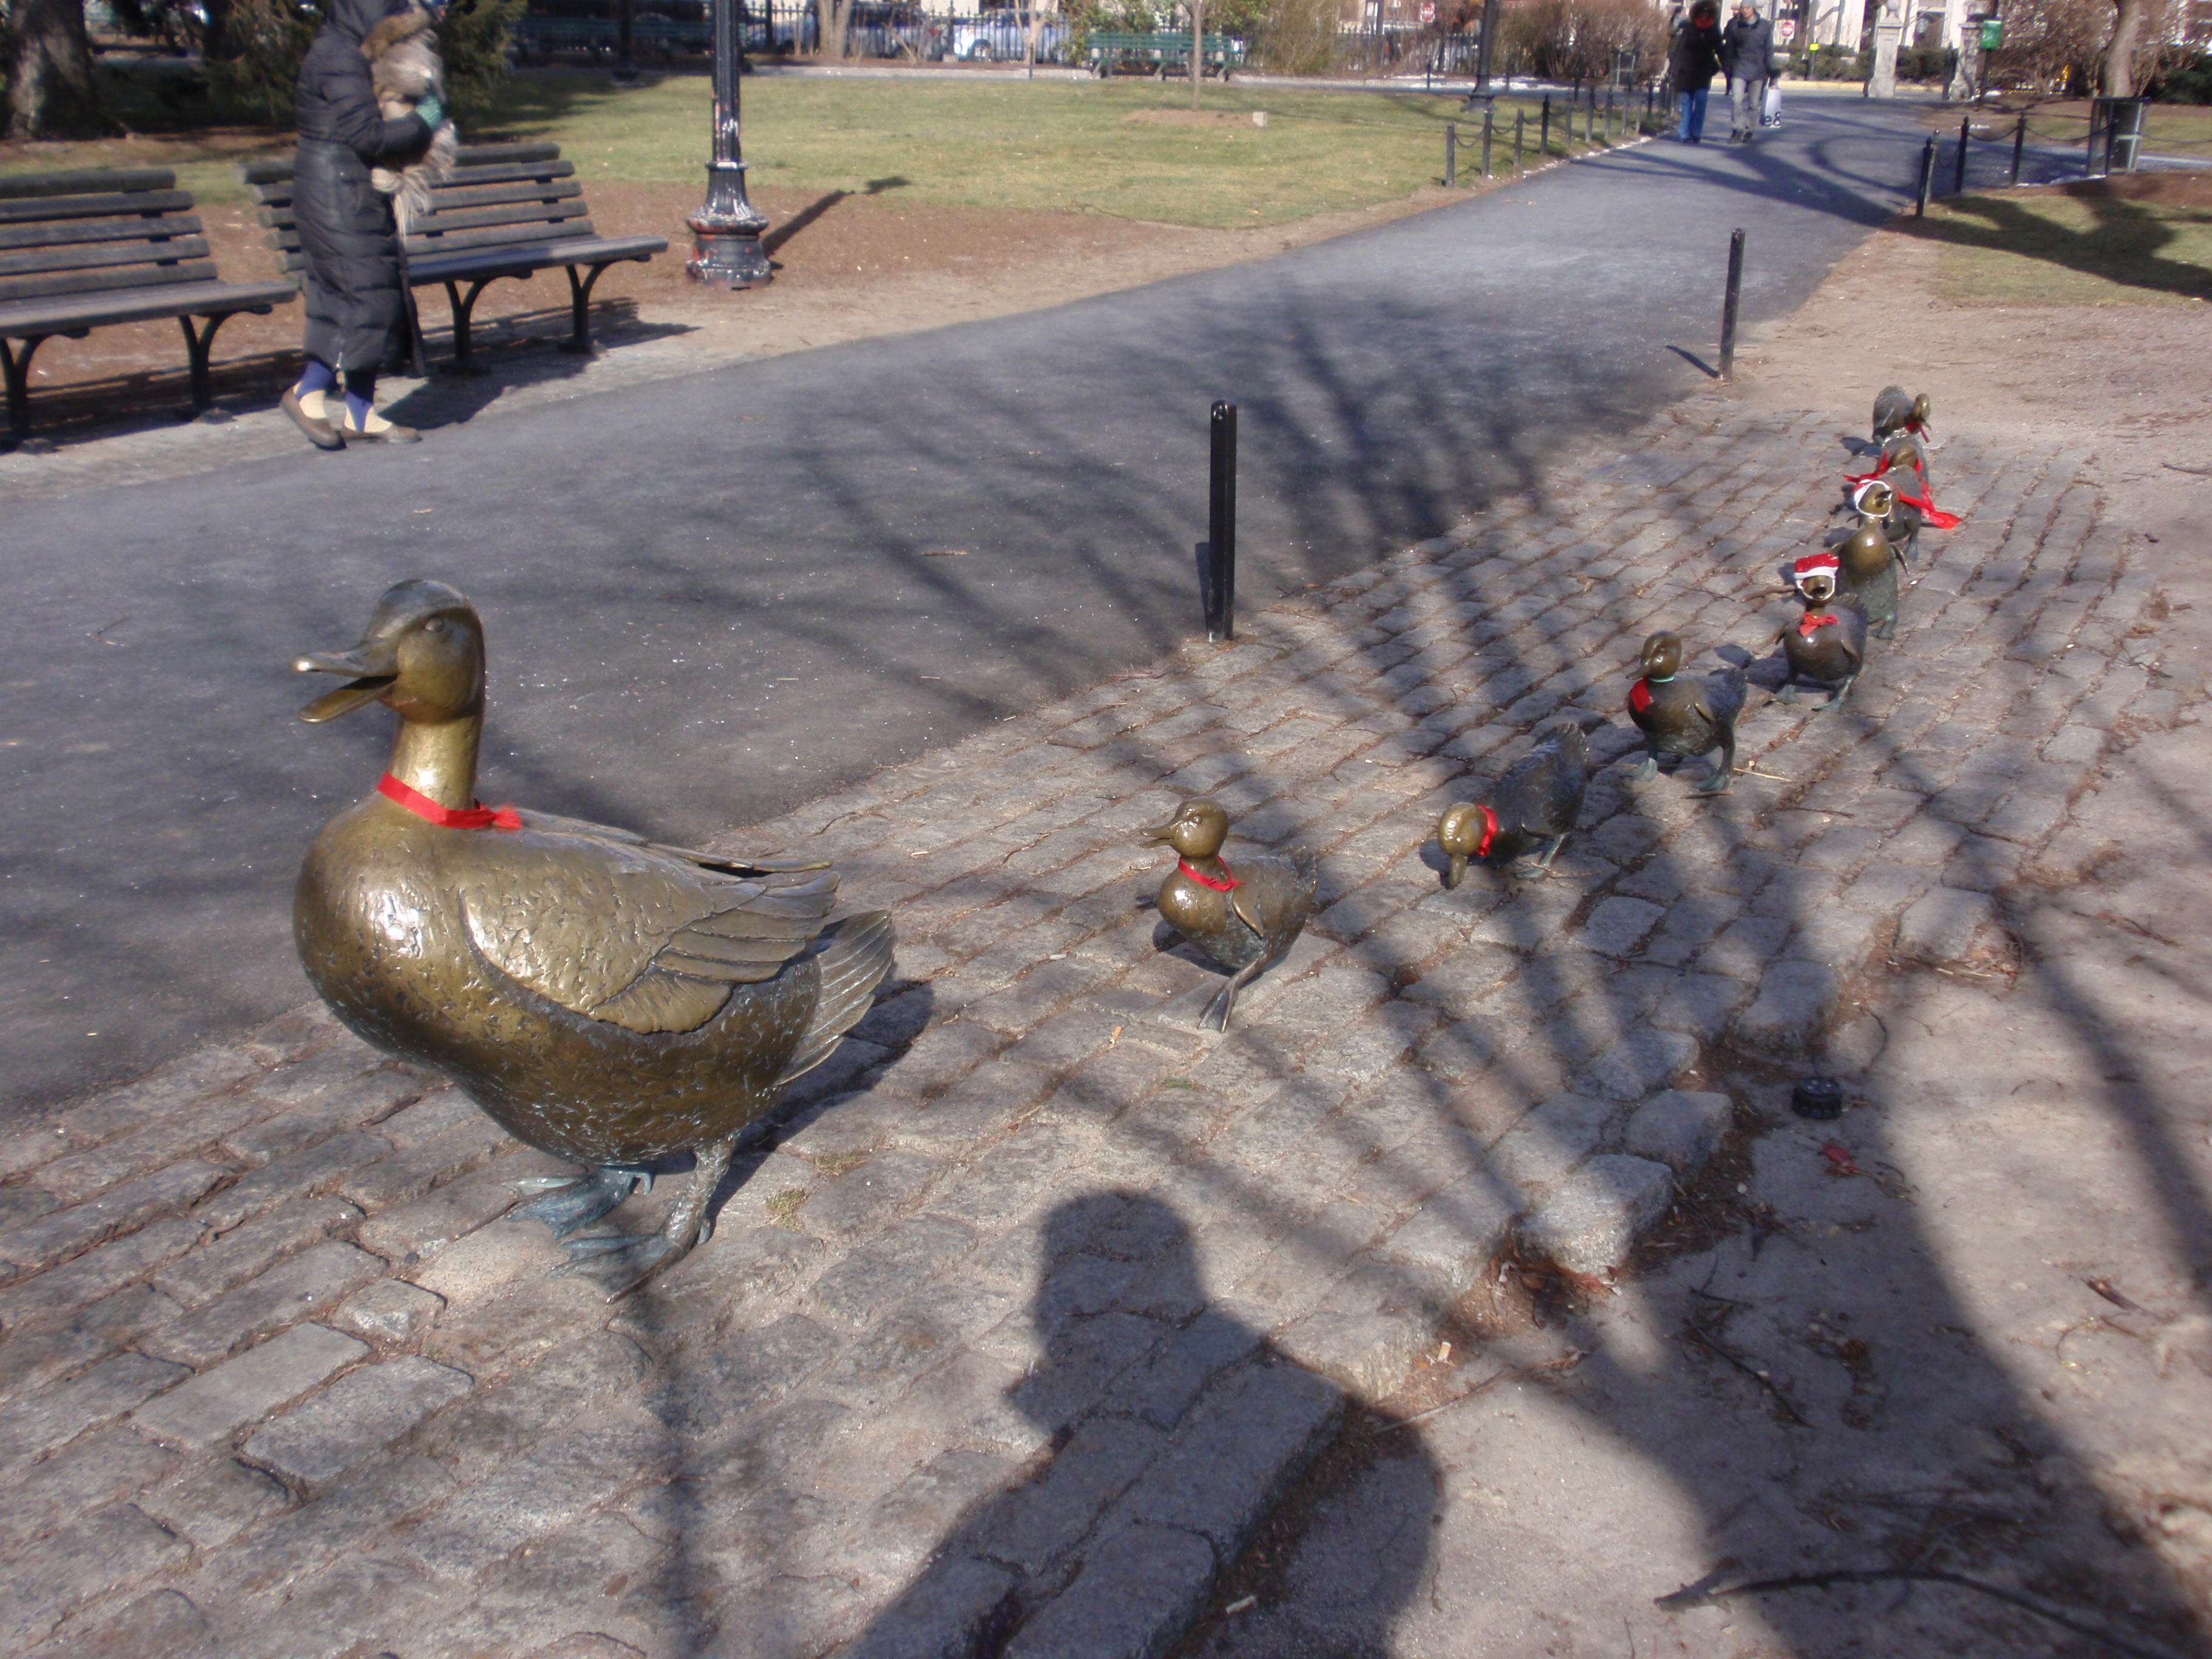 "Make Way for Ducklings!"